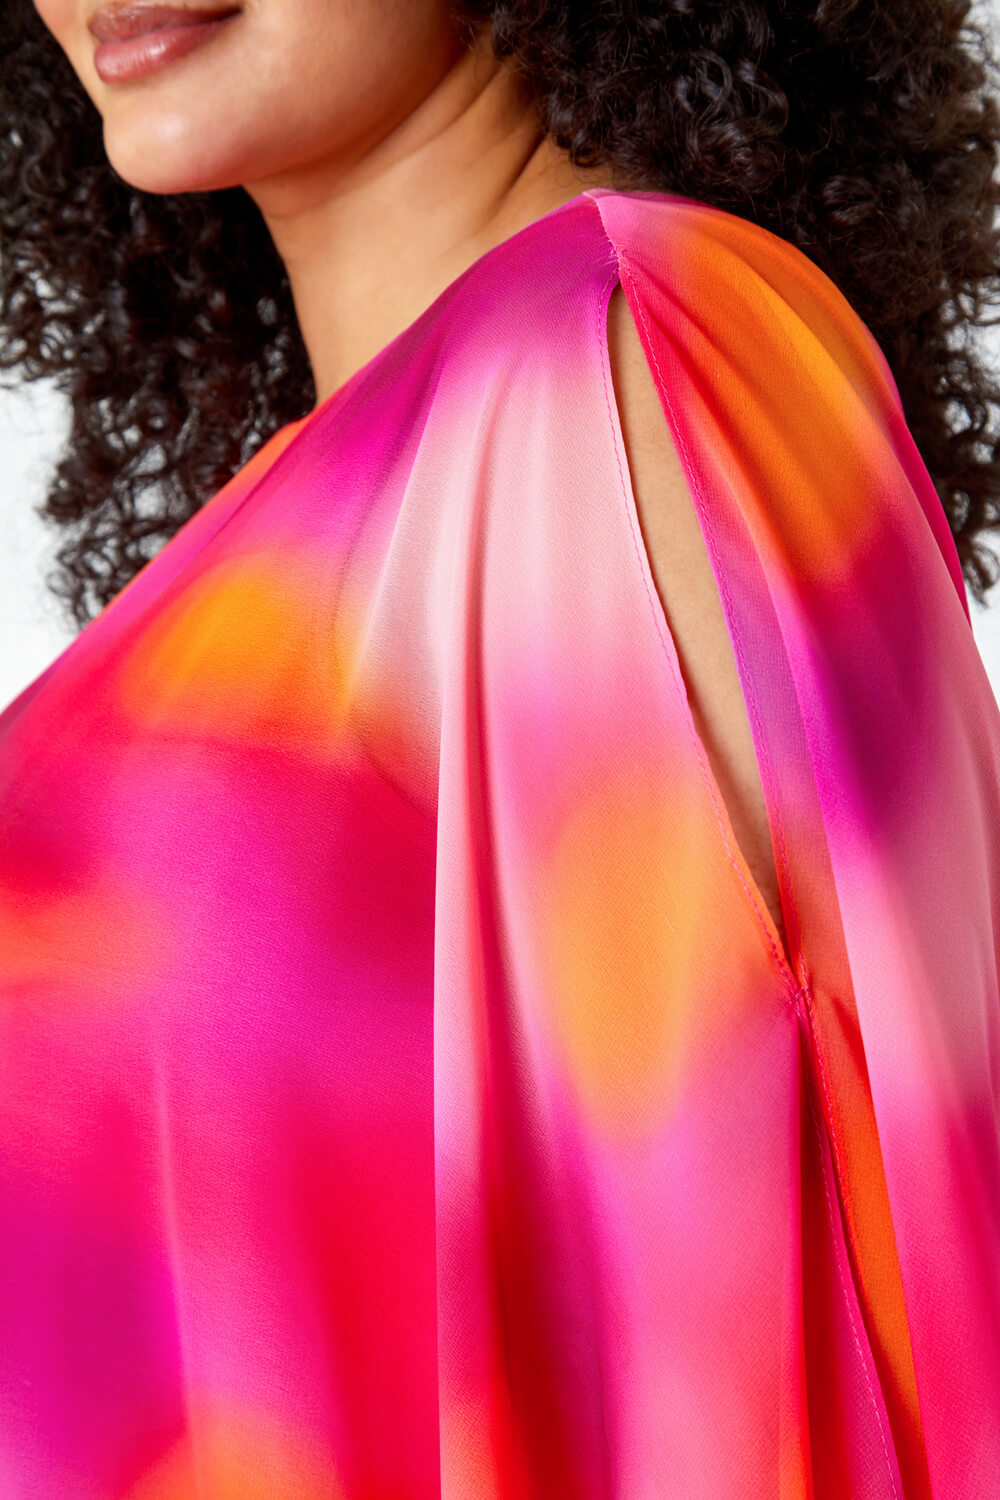 PINK Curve Ombre Print Chiffon Overlay Top, Image 5 of 5